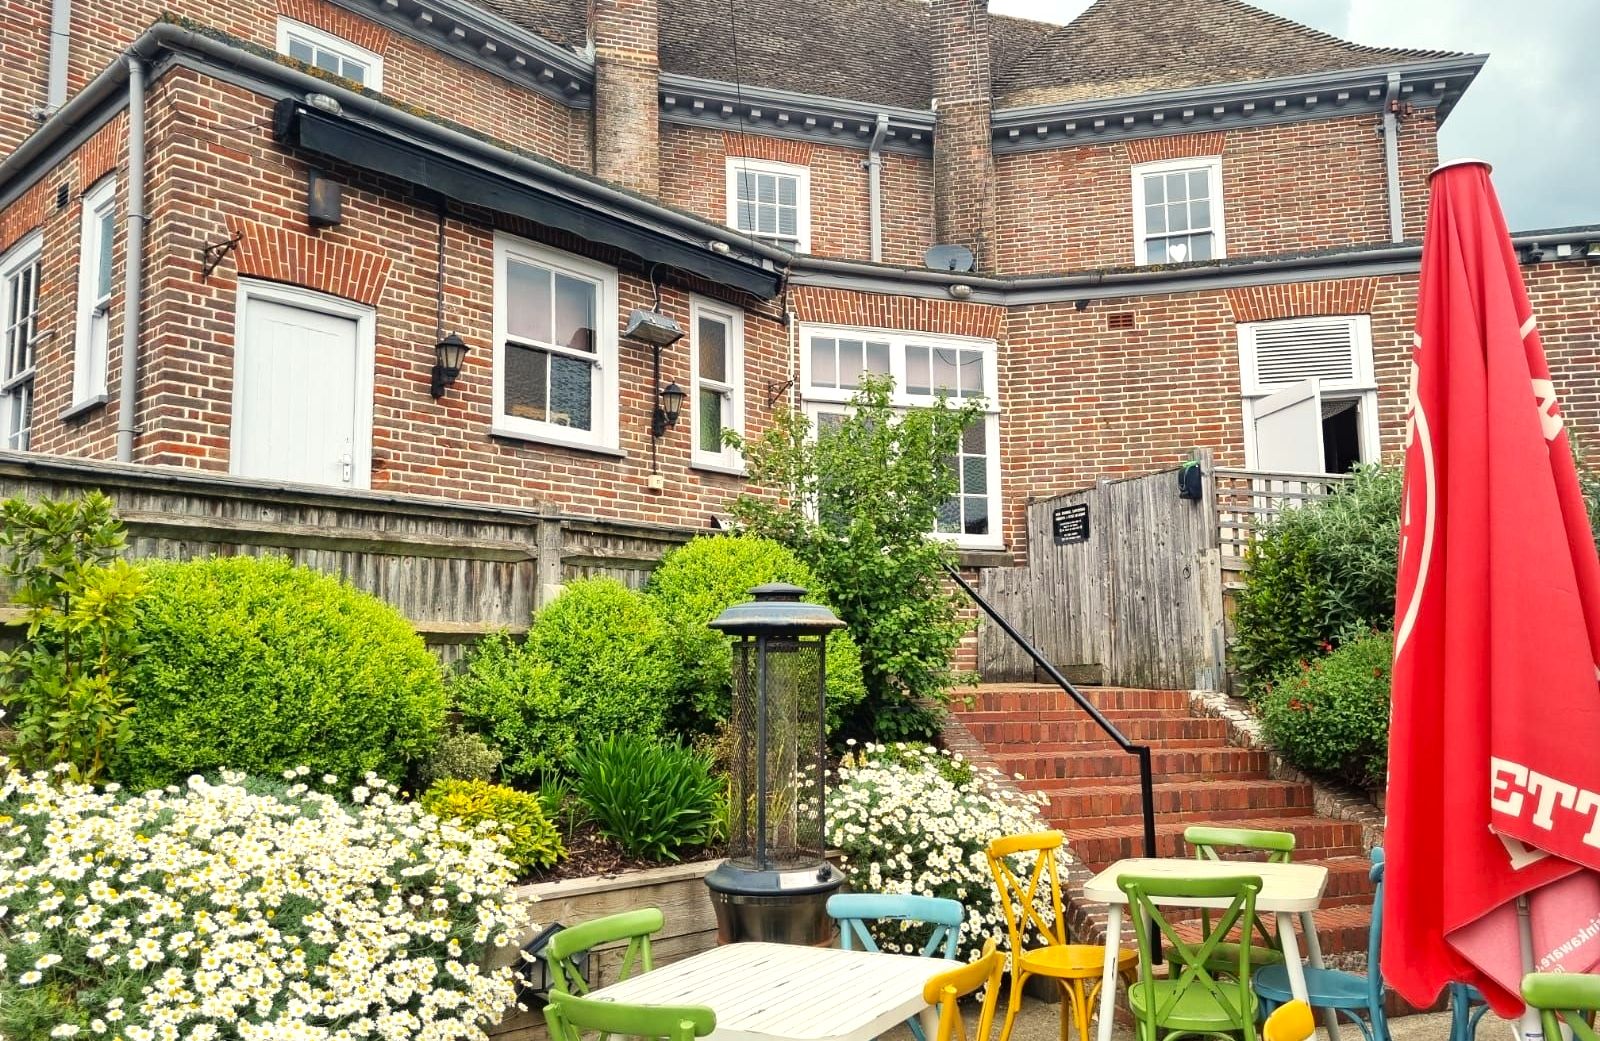 exterior shot of Ladies Mile pub, brick house with beautiful full of plants garden, white tables and chairs in different colors such as green, yellow, blue. There are couple of parasols